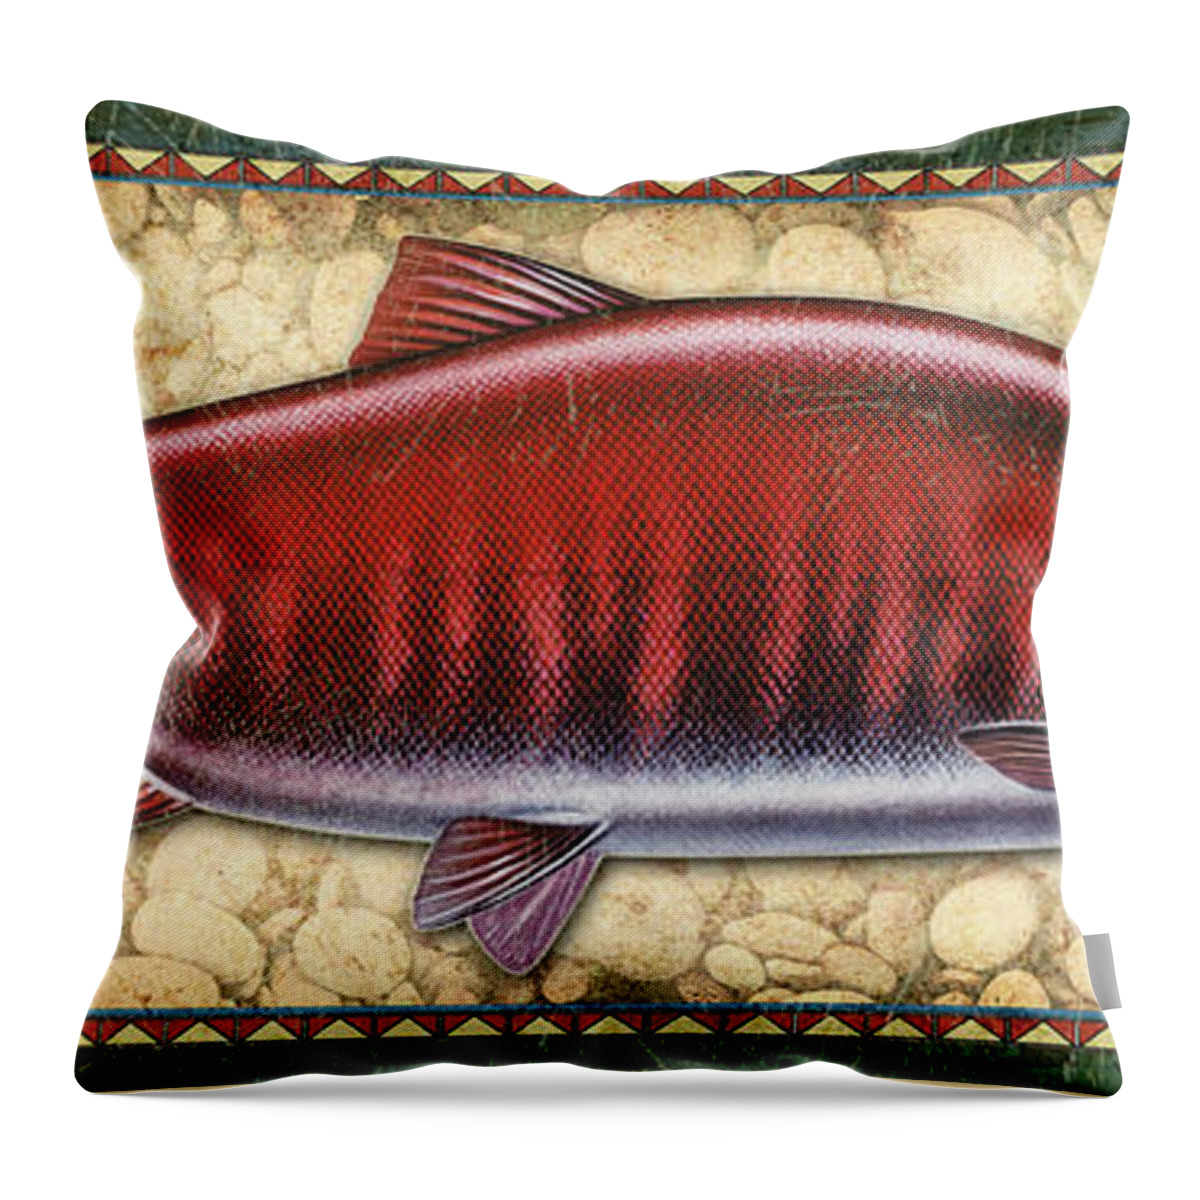 Sockeye Salmon Throw Pillow featuring the painting Sockeye Salmon Spawning Panel by JQ Licensing